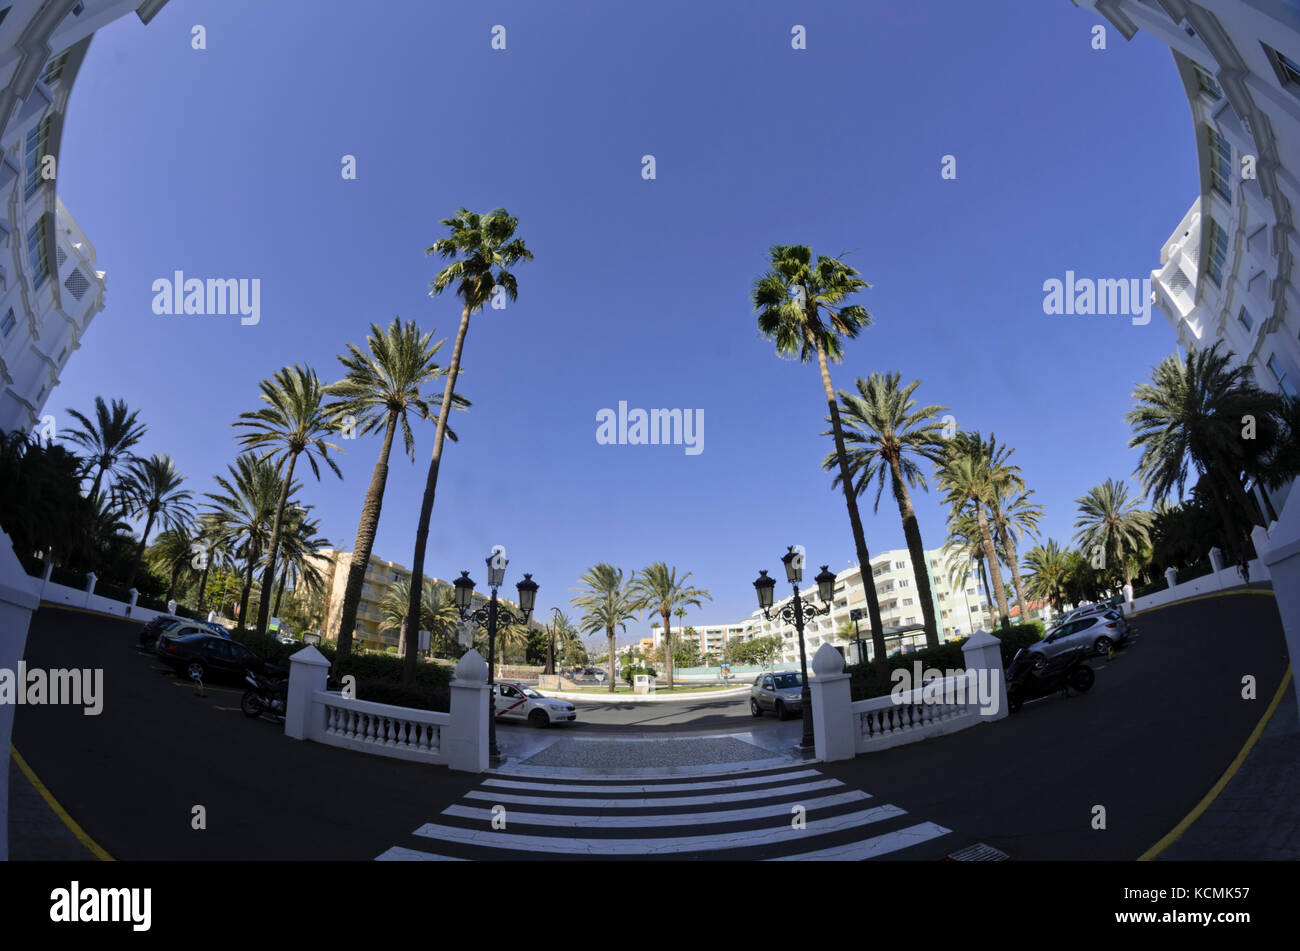 Square with palms, Playa del Ingles, Gran Canaria, Spain Stock Photo